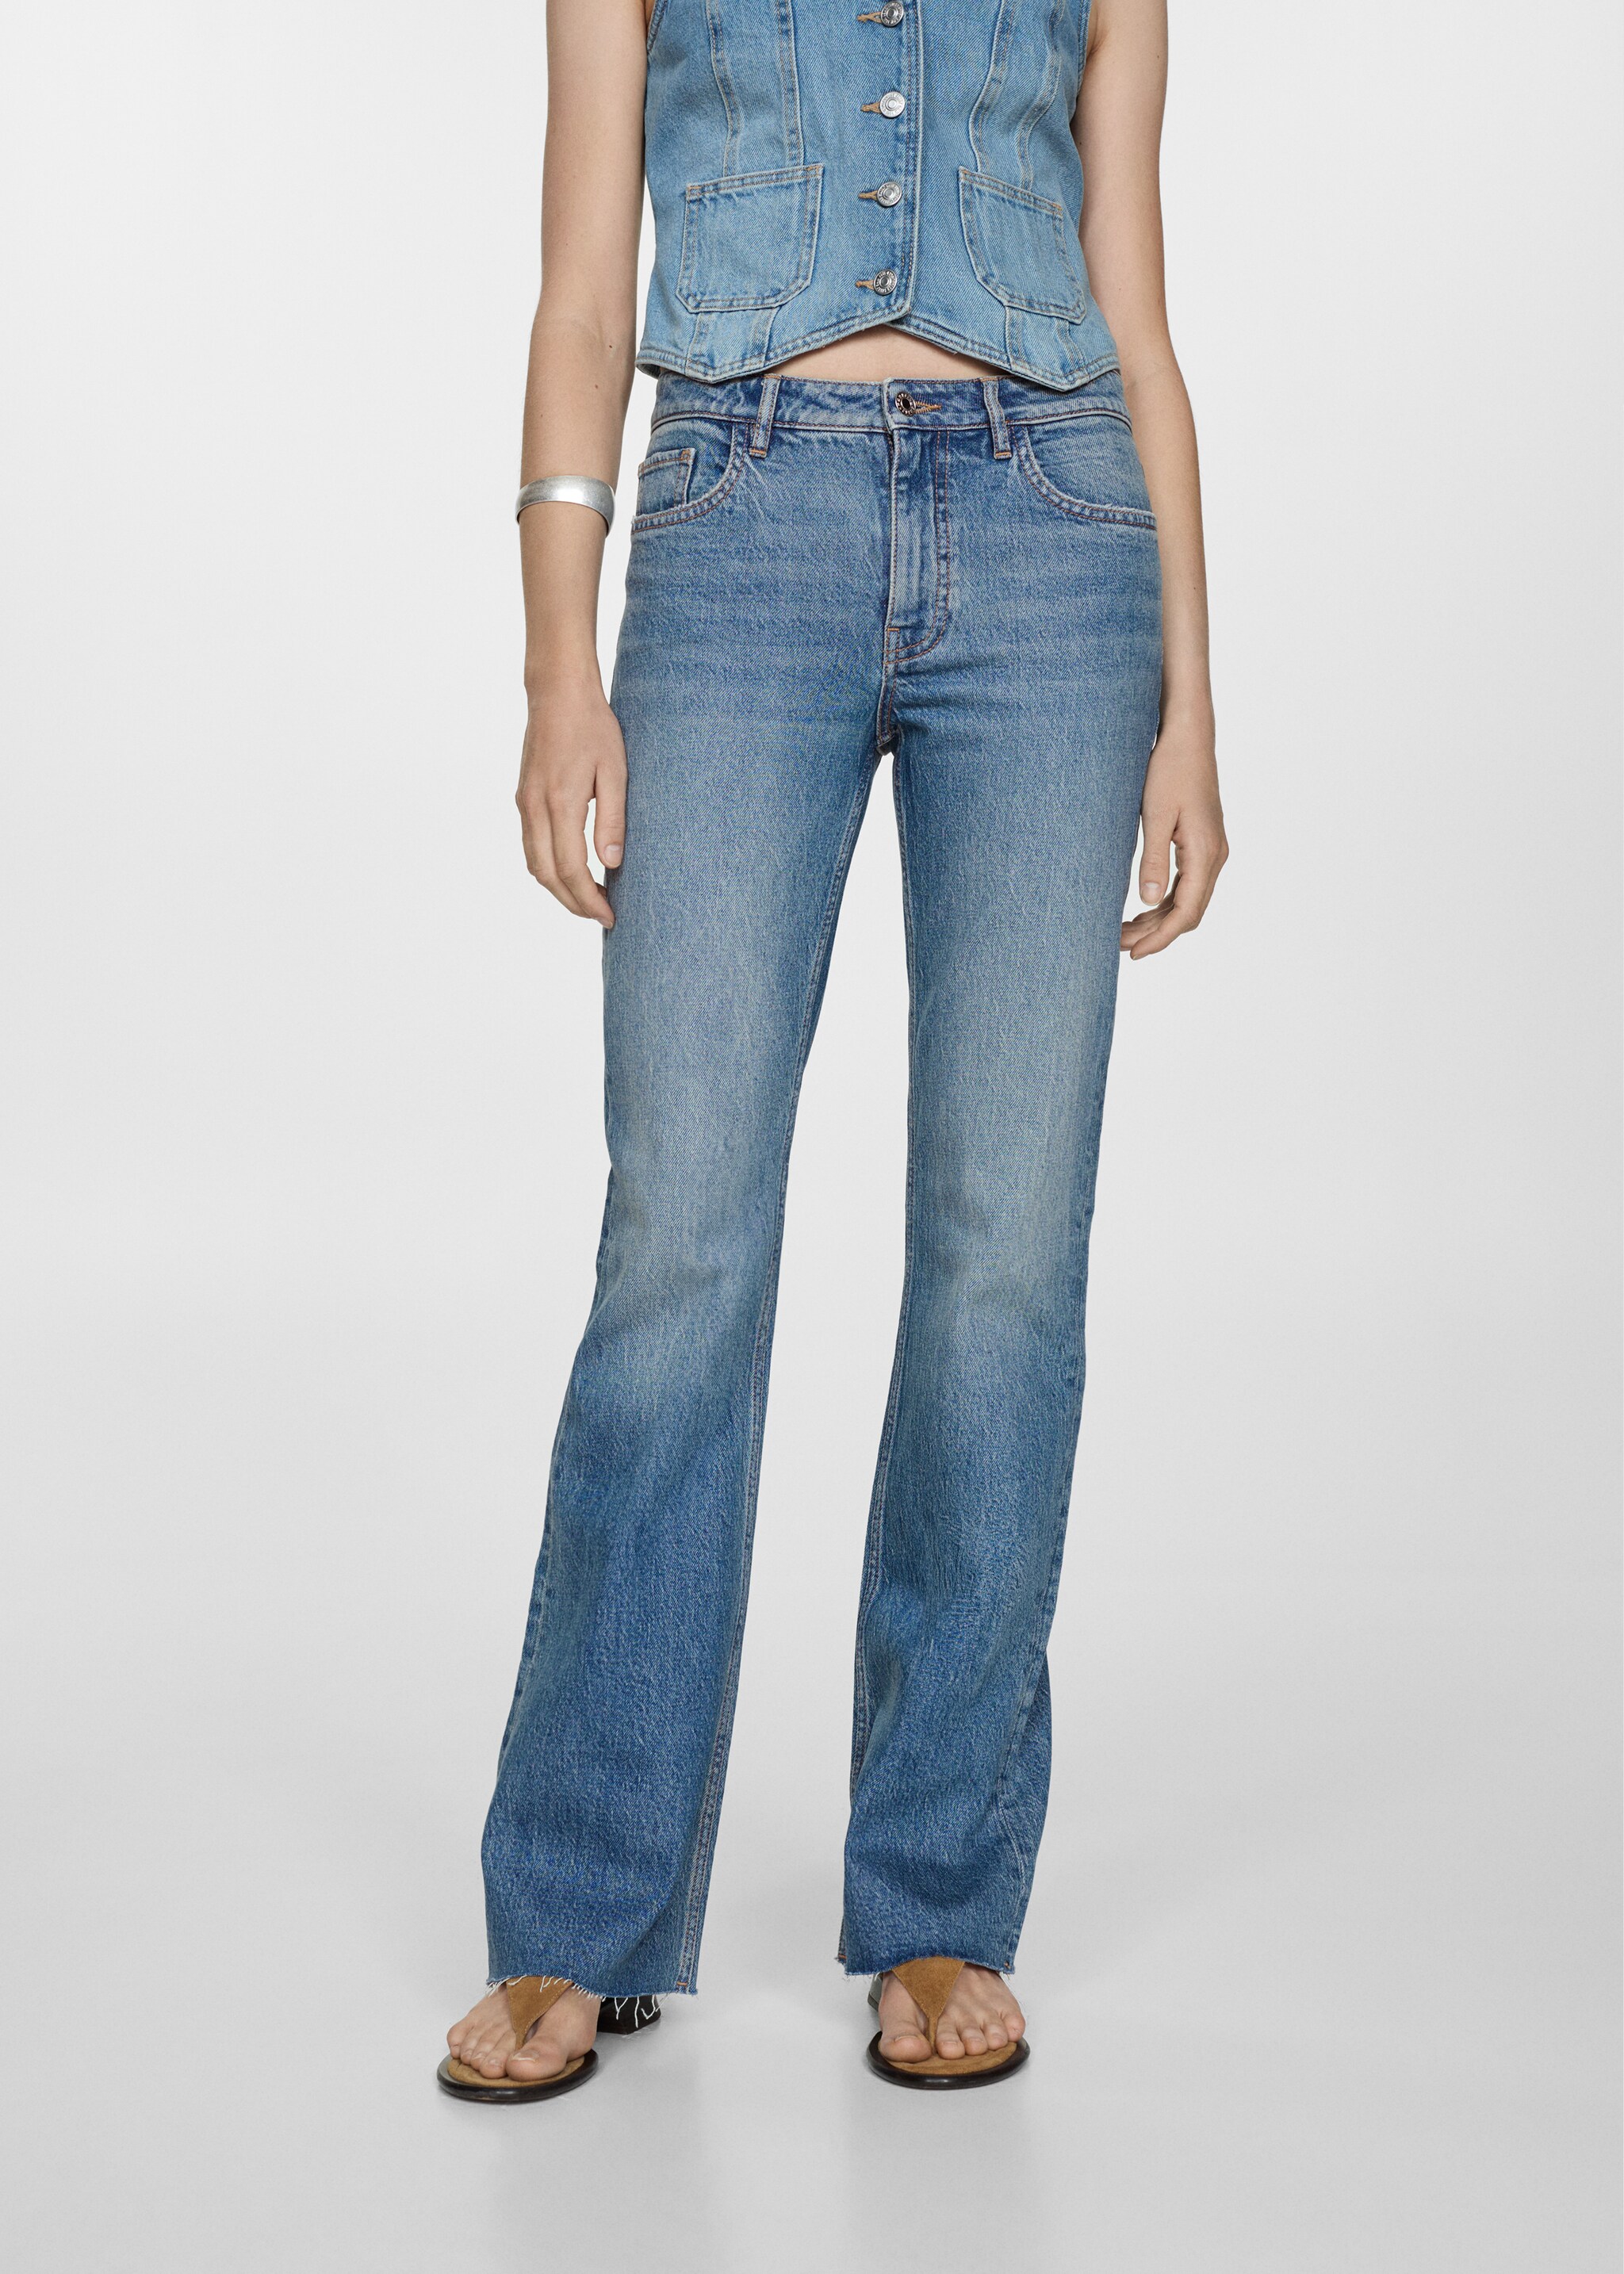 Jeans flare taille normale - Plan moyen